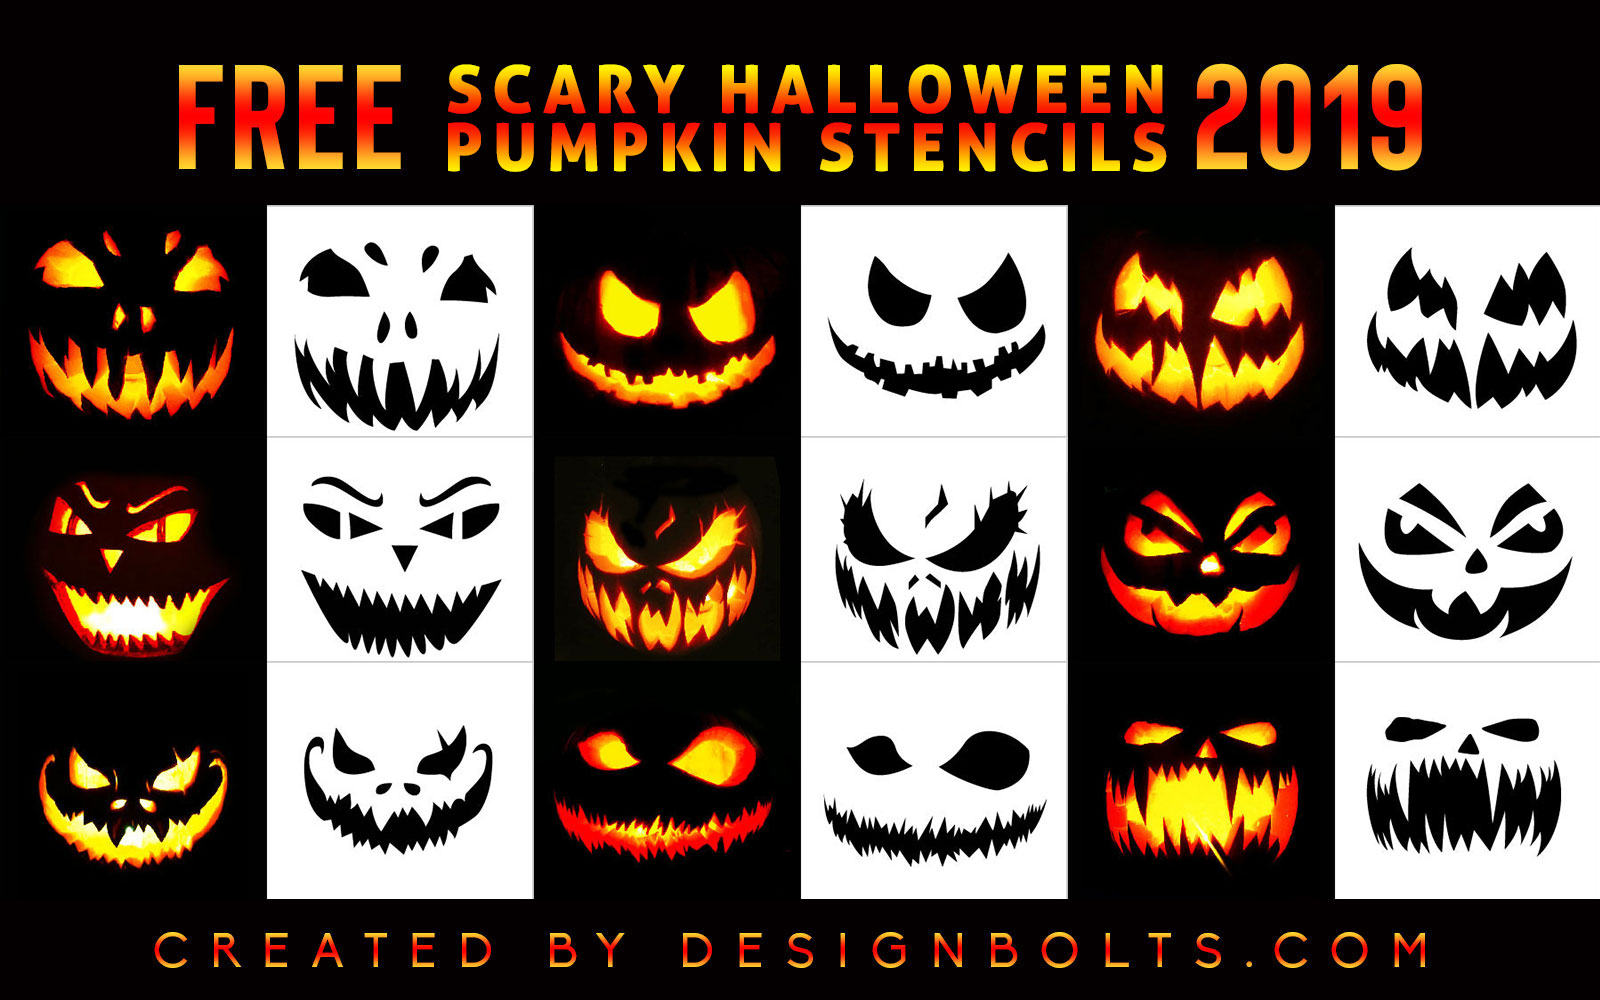 10 Free Scary Halloween Pumpkin Carving Stencils Patterns Ideas 2019 Jack O Lantern Faces Images Designbolts,Bamboo Floors With Grey Walls